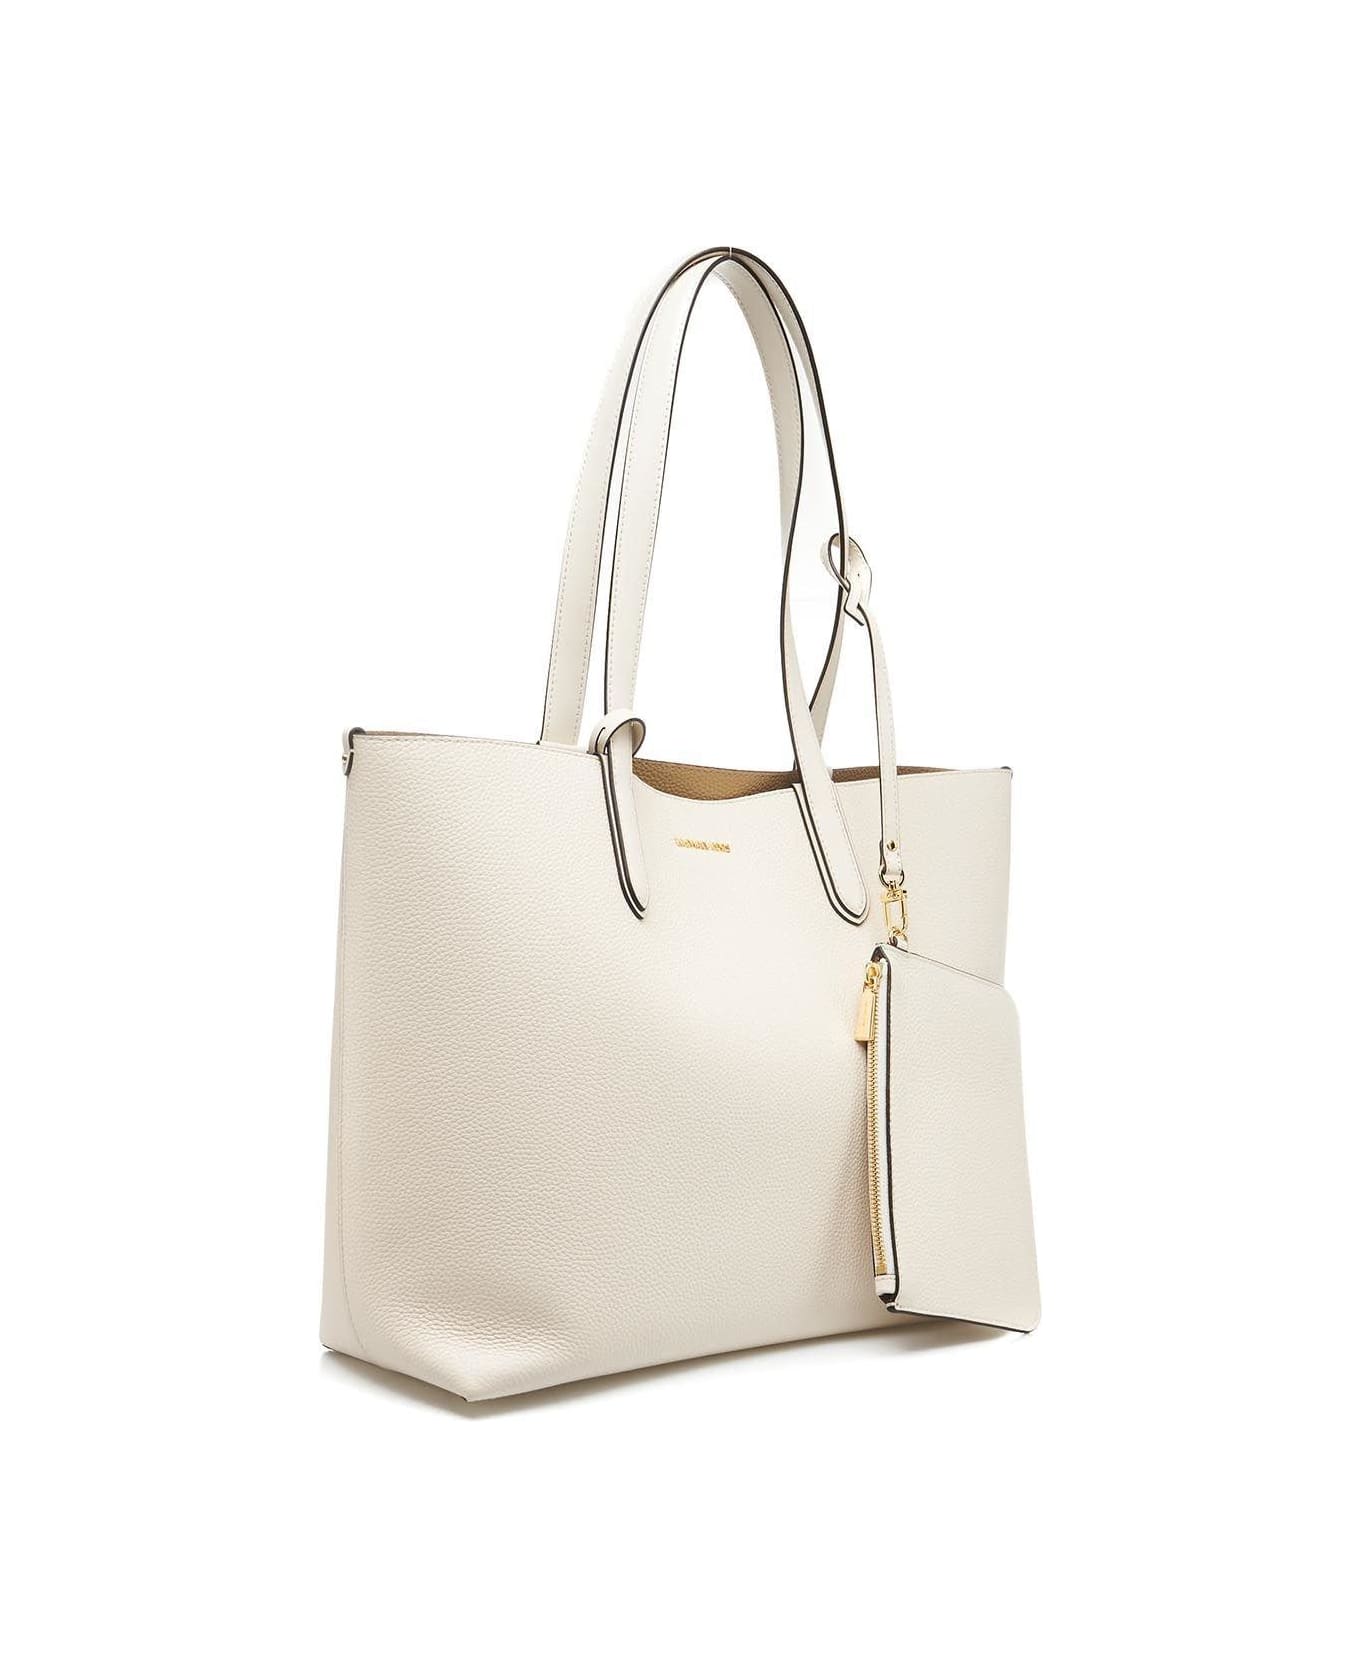 Michael Kors Collection Eliza Reversible Extra-large Tote Bag - Light Cream トートバッグ